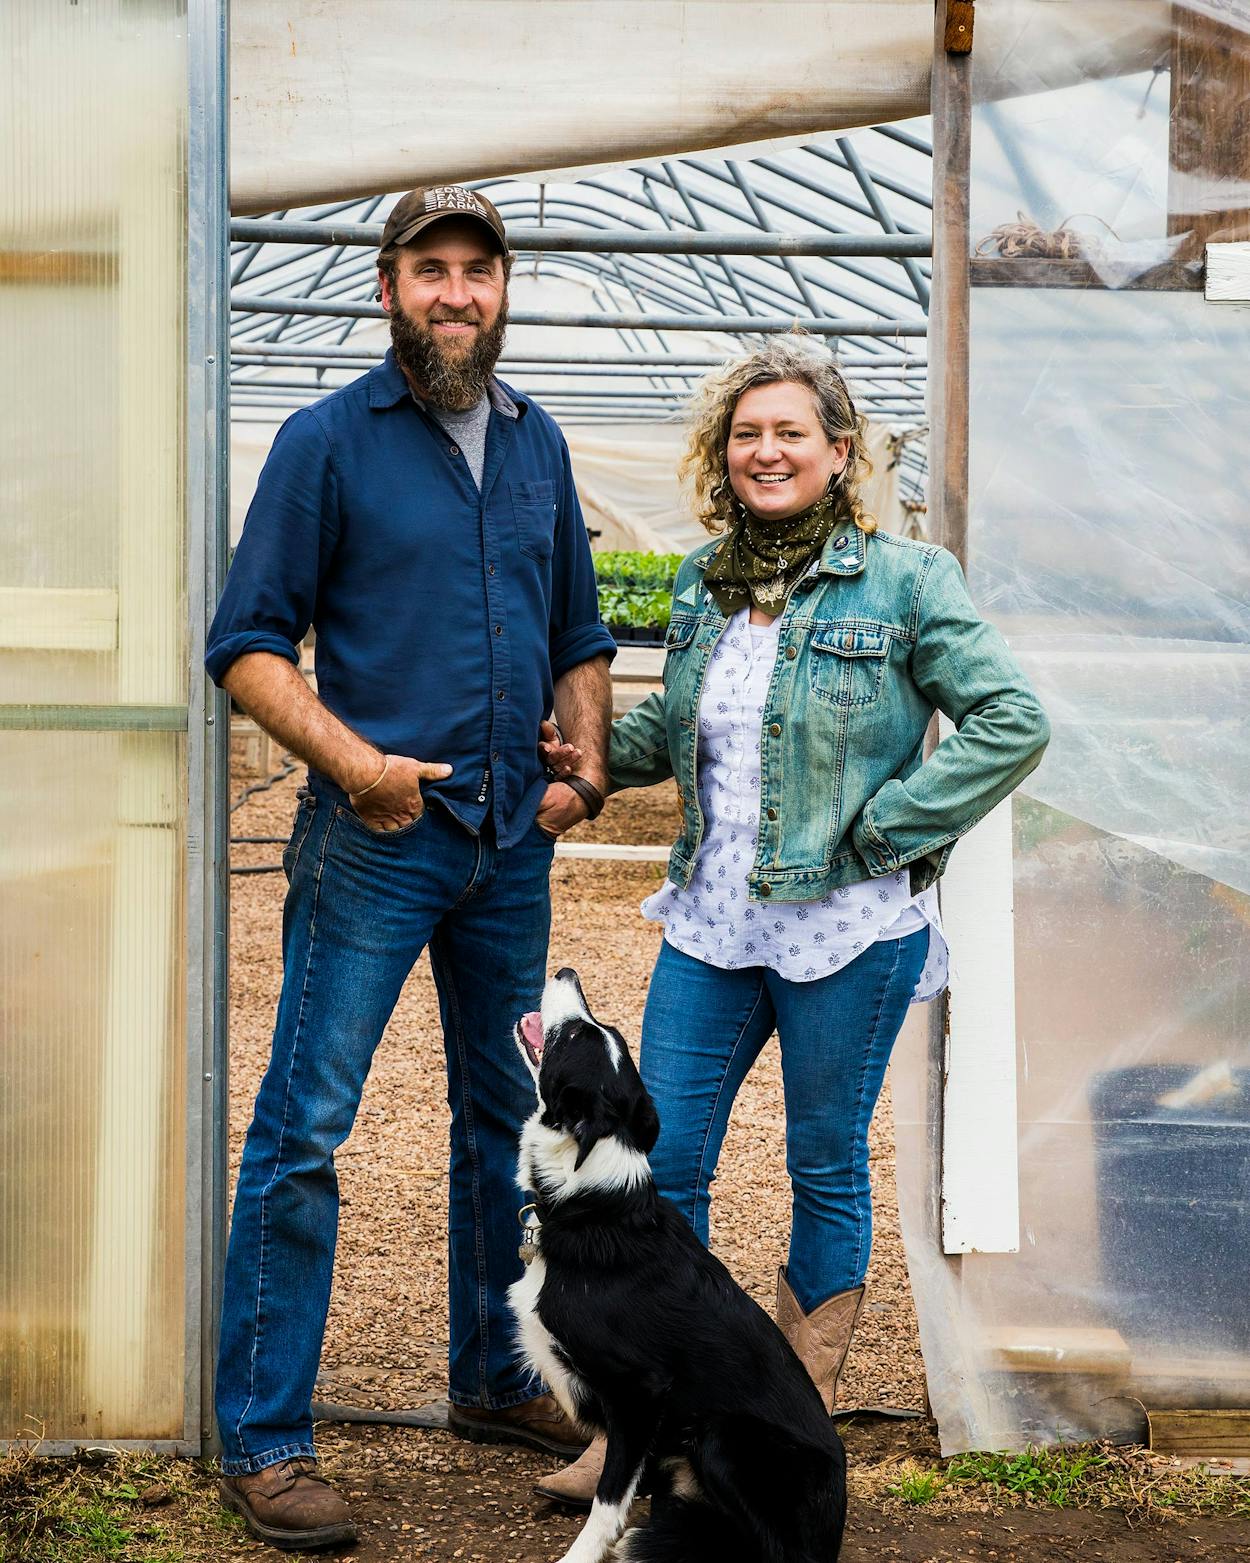 David Barrow and Sonya Cote, with their dog Willie, at Eden East Farm, in Bastrop, on February 27, 2021.